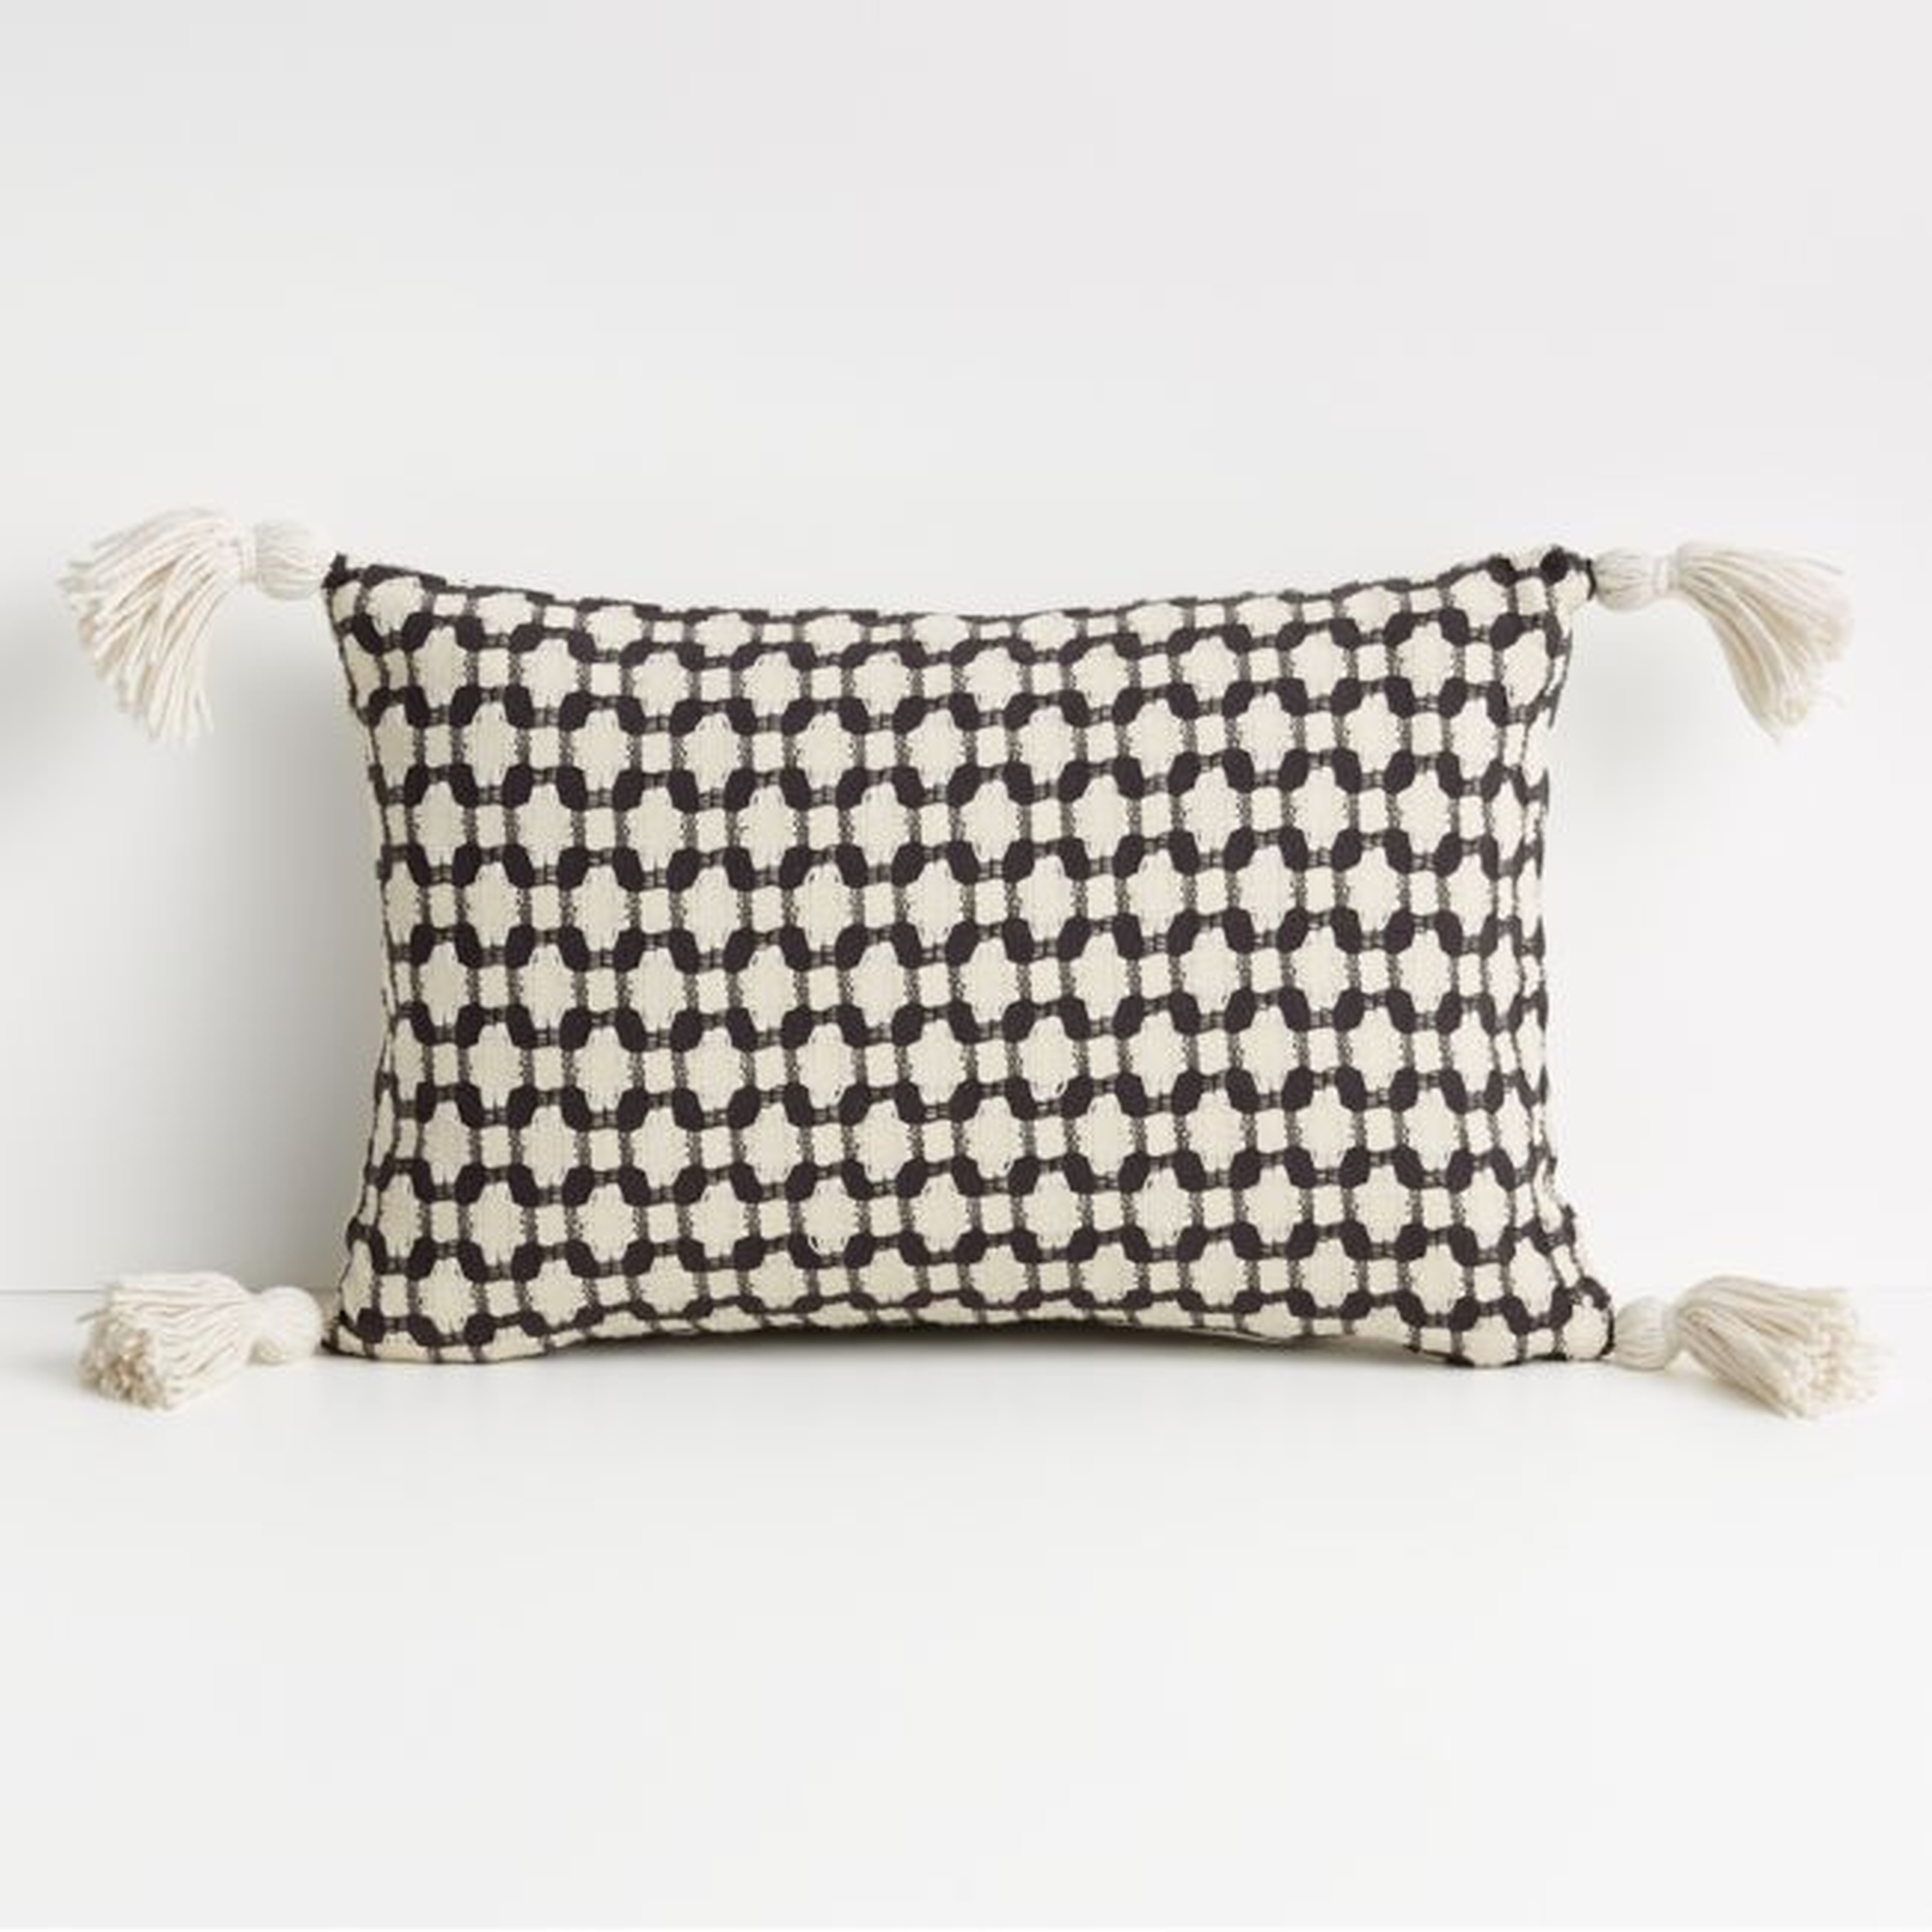 Tahona Textured Pillow with Down-Alternative Insert, Obsidian, 18" x 12" - Crate and Barrel